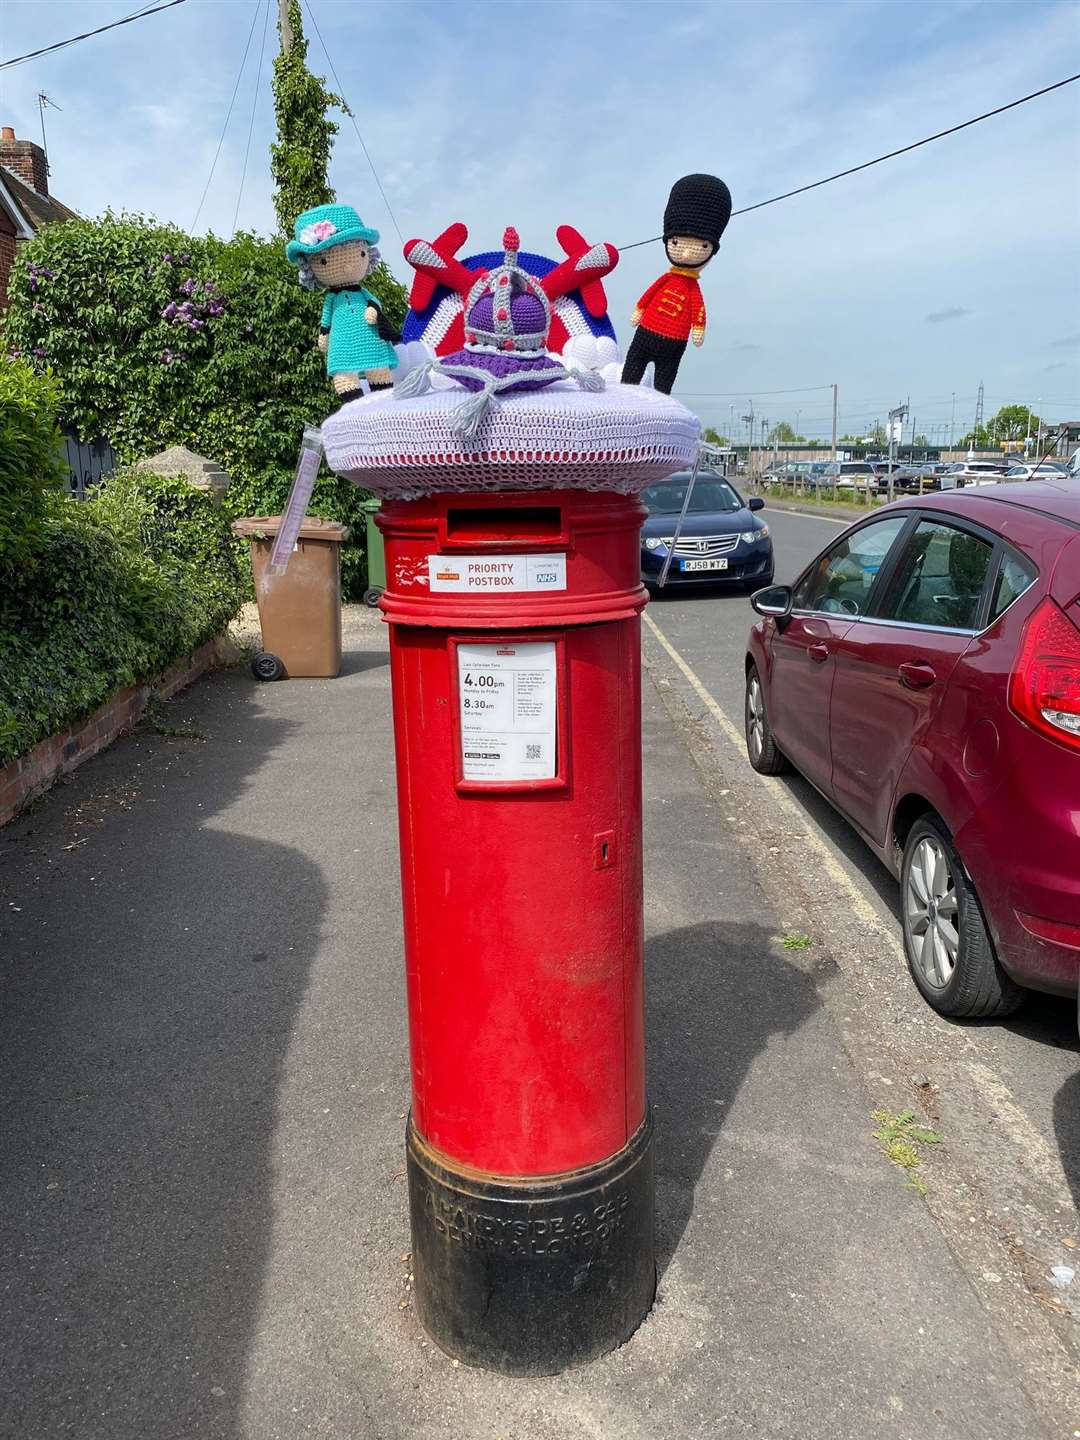 One crochet expert has decorated a post box in Didcot, Oxfordshire (Yarnsy/PA)